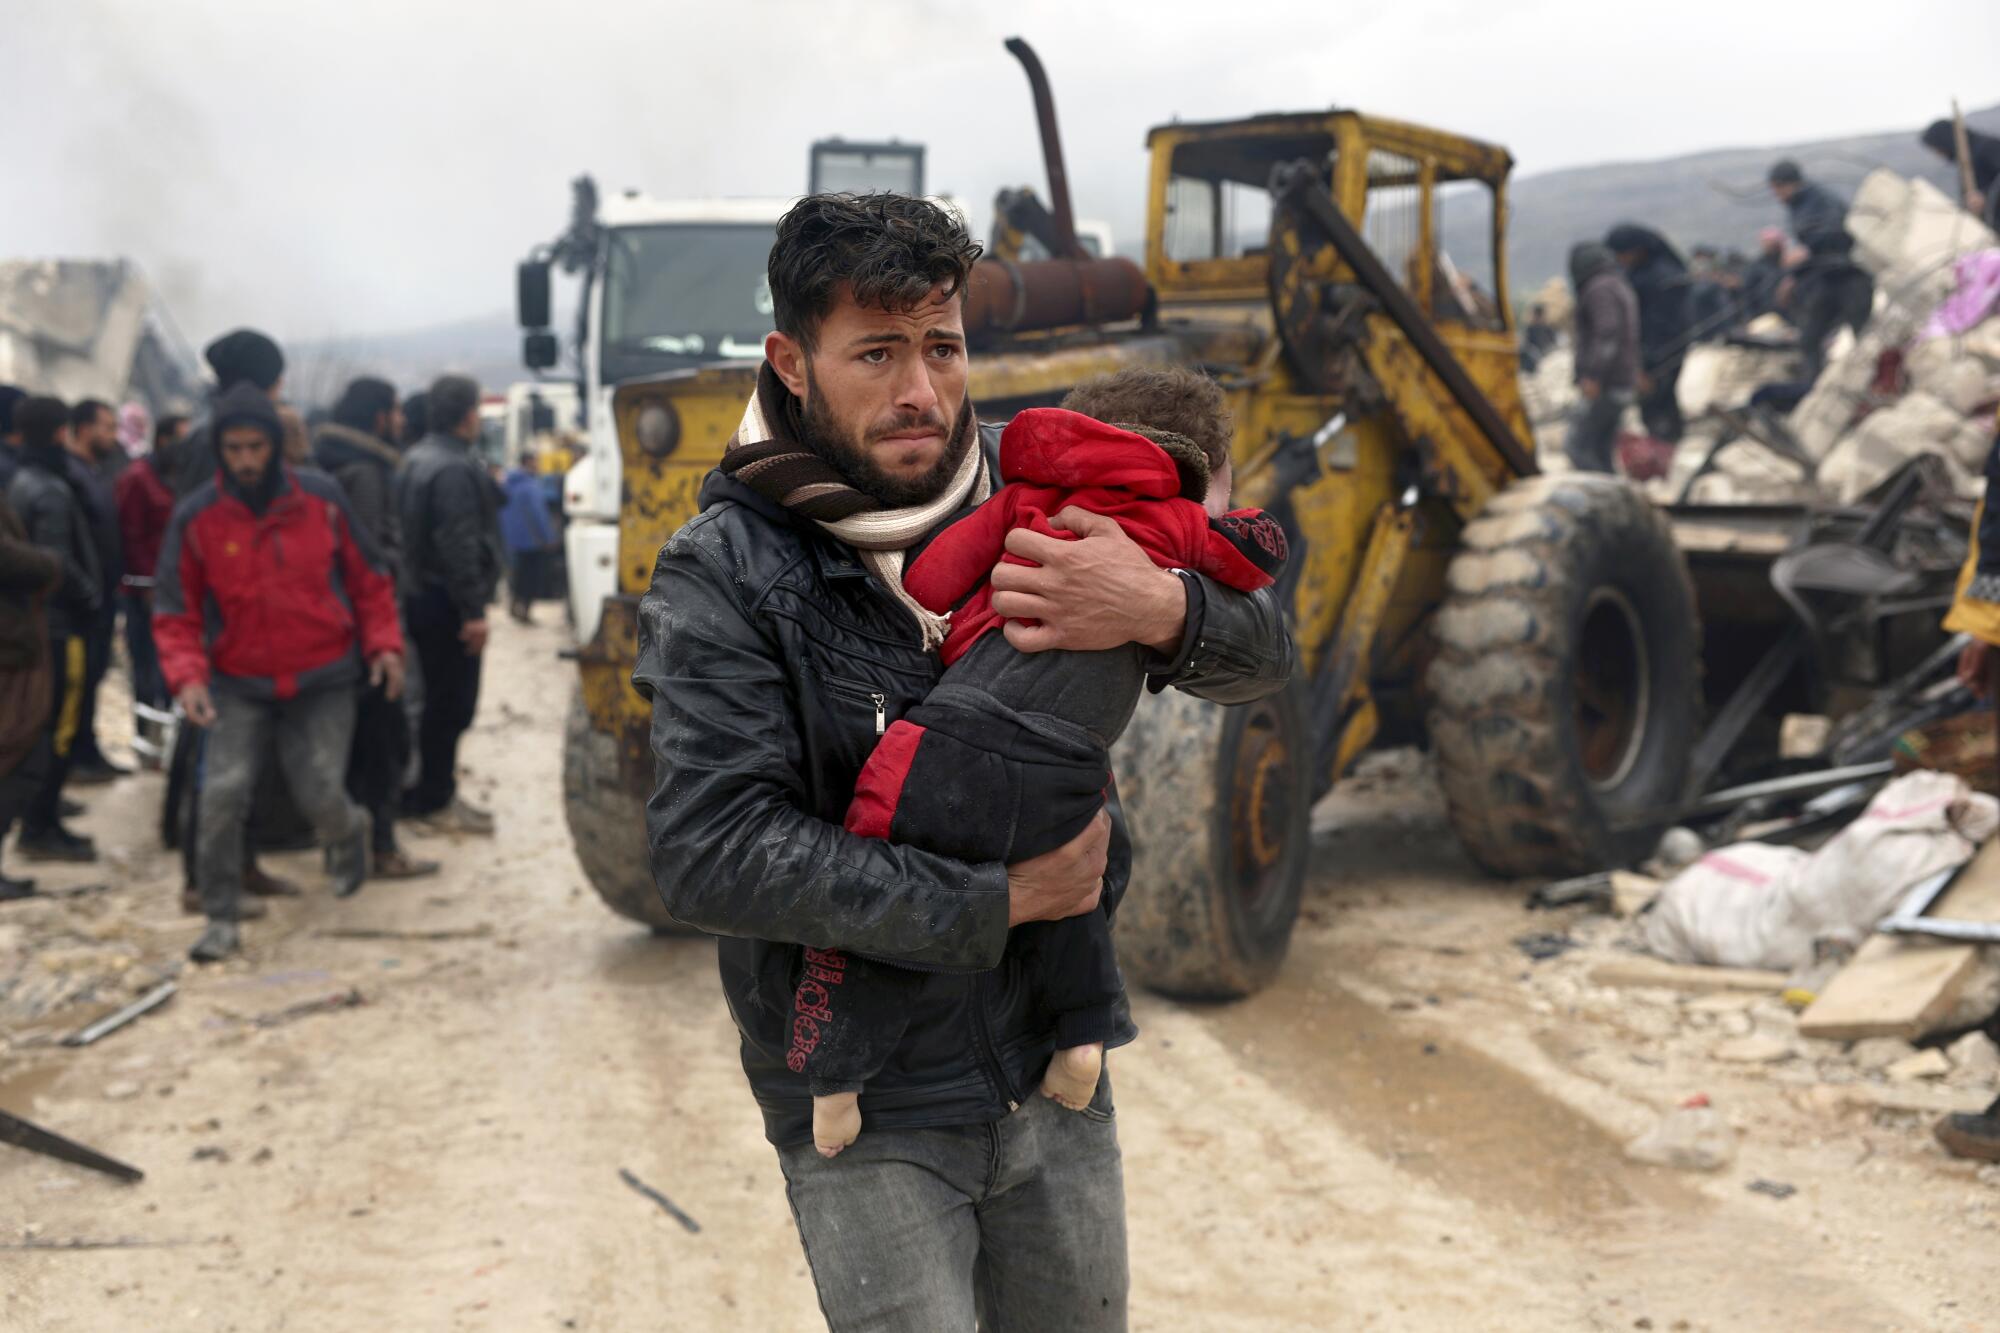 A man walks down a road between damaged buildings and machinery while he carries a young child.